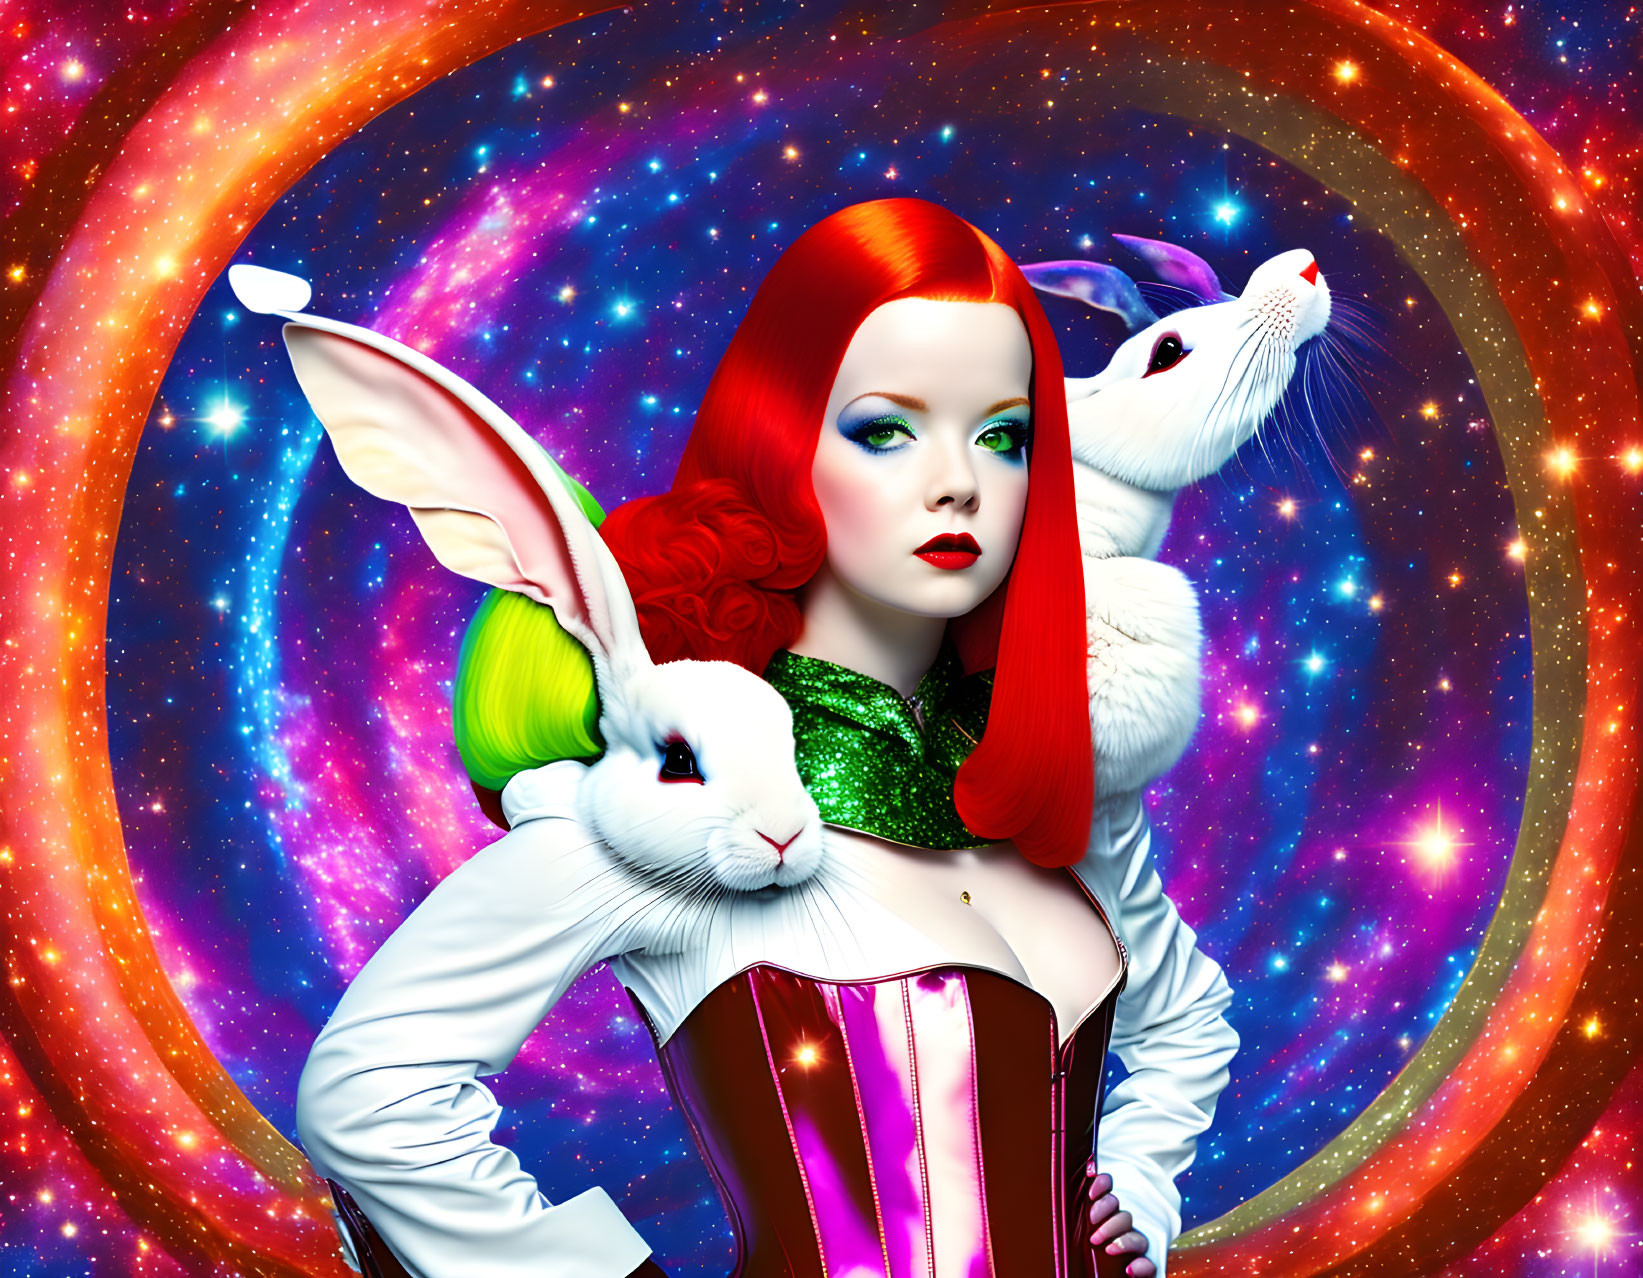 Fantasy illustration: Red-haired woman, white rabbits, galaxy backdrop